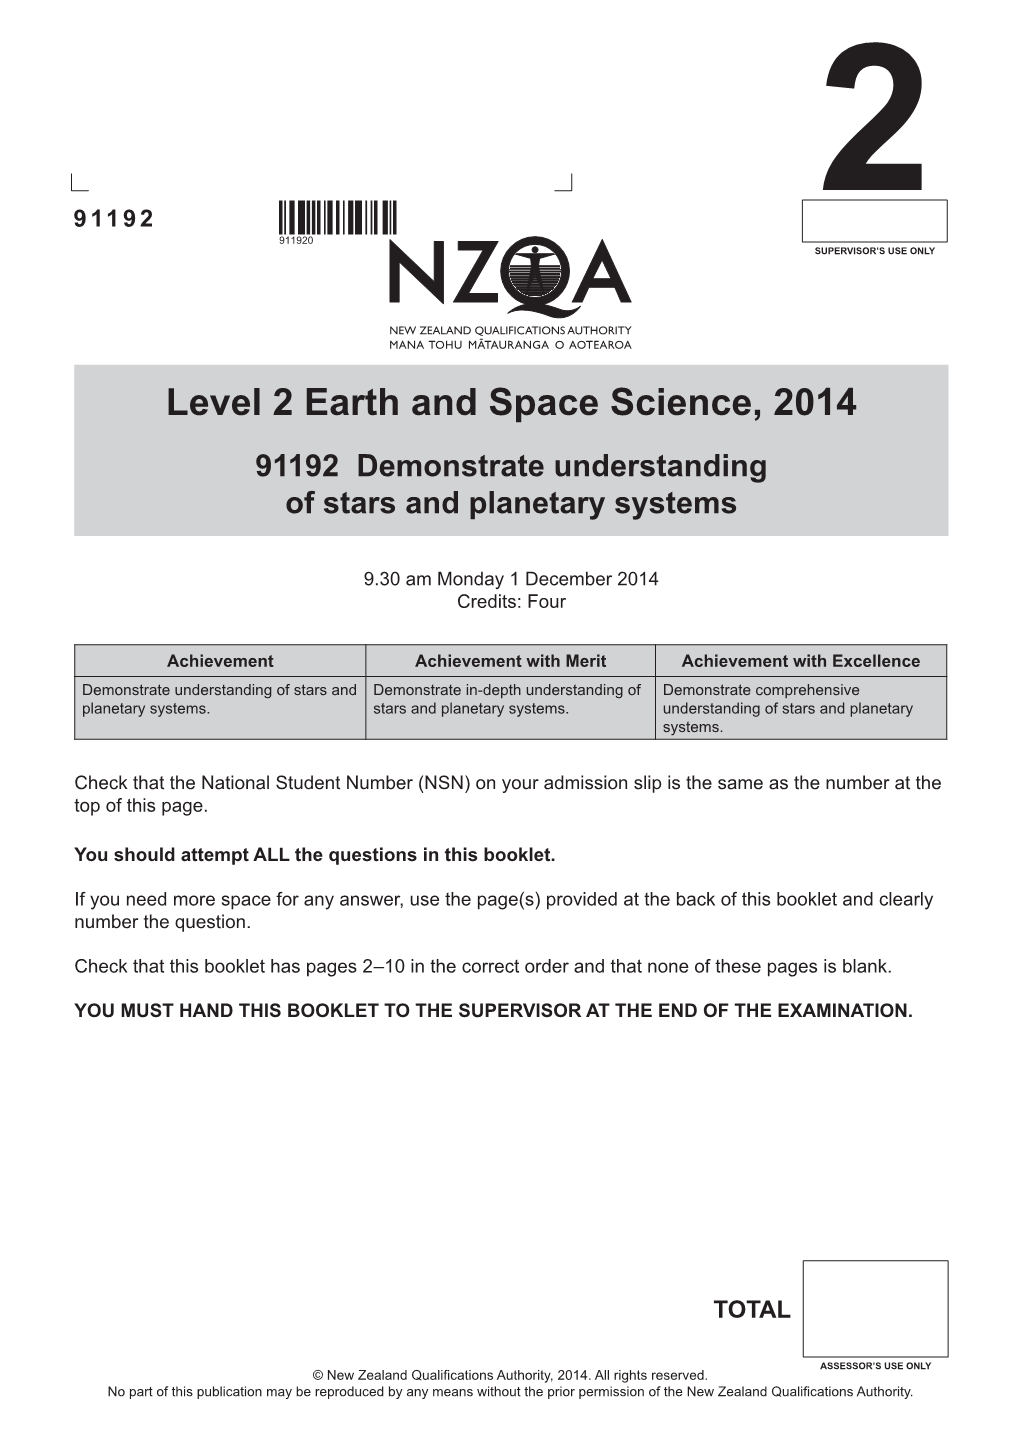 Level 2 Earth and Space Science (91192) 2014